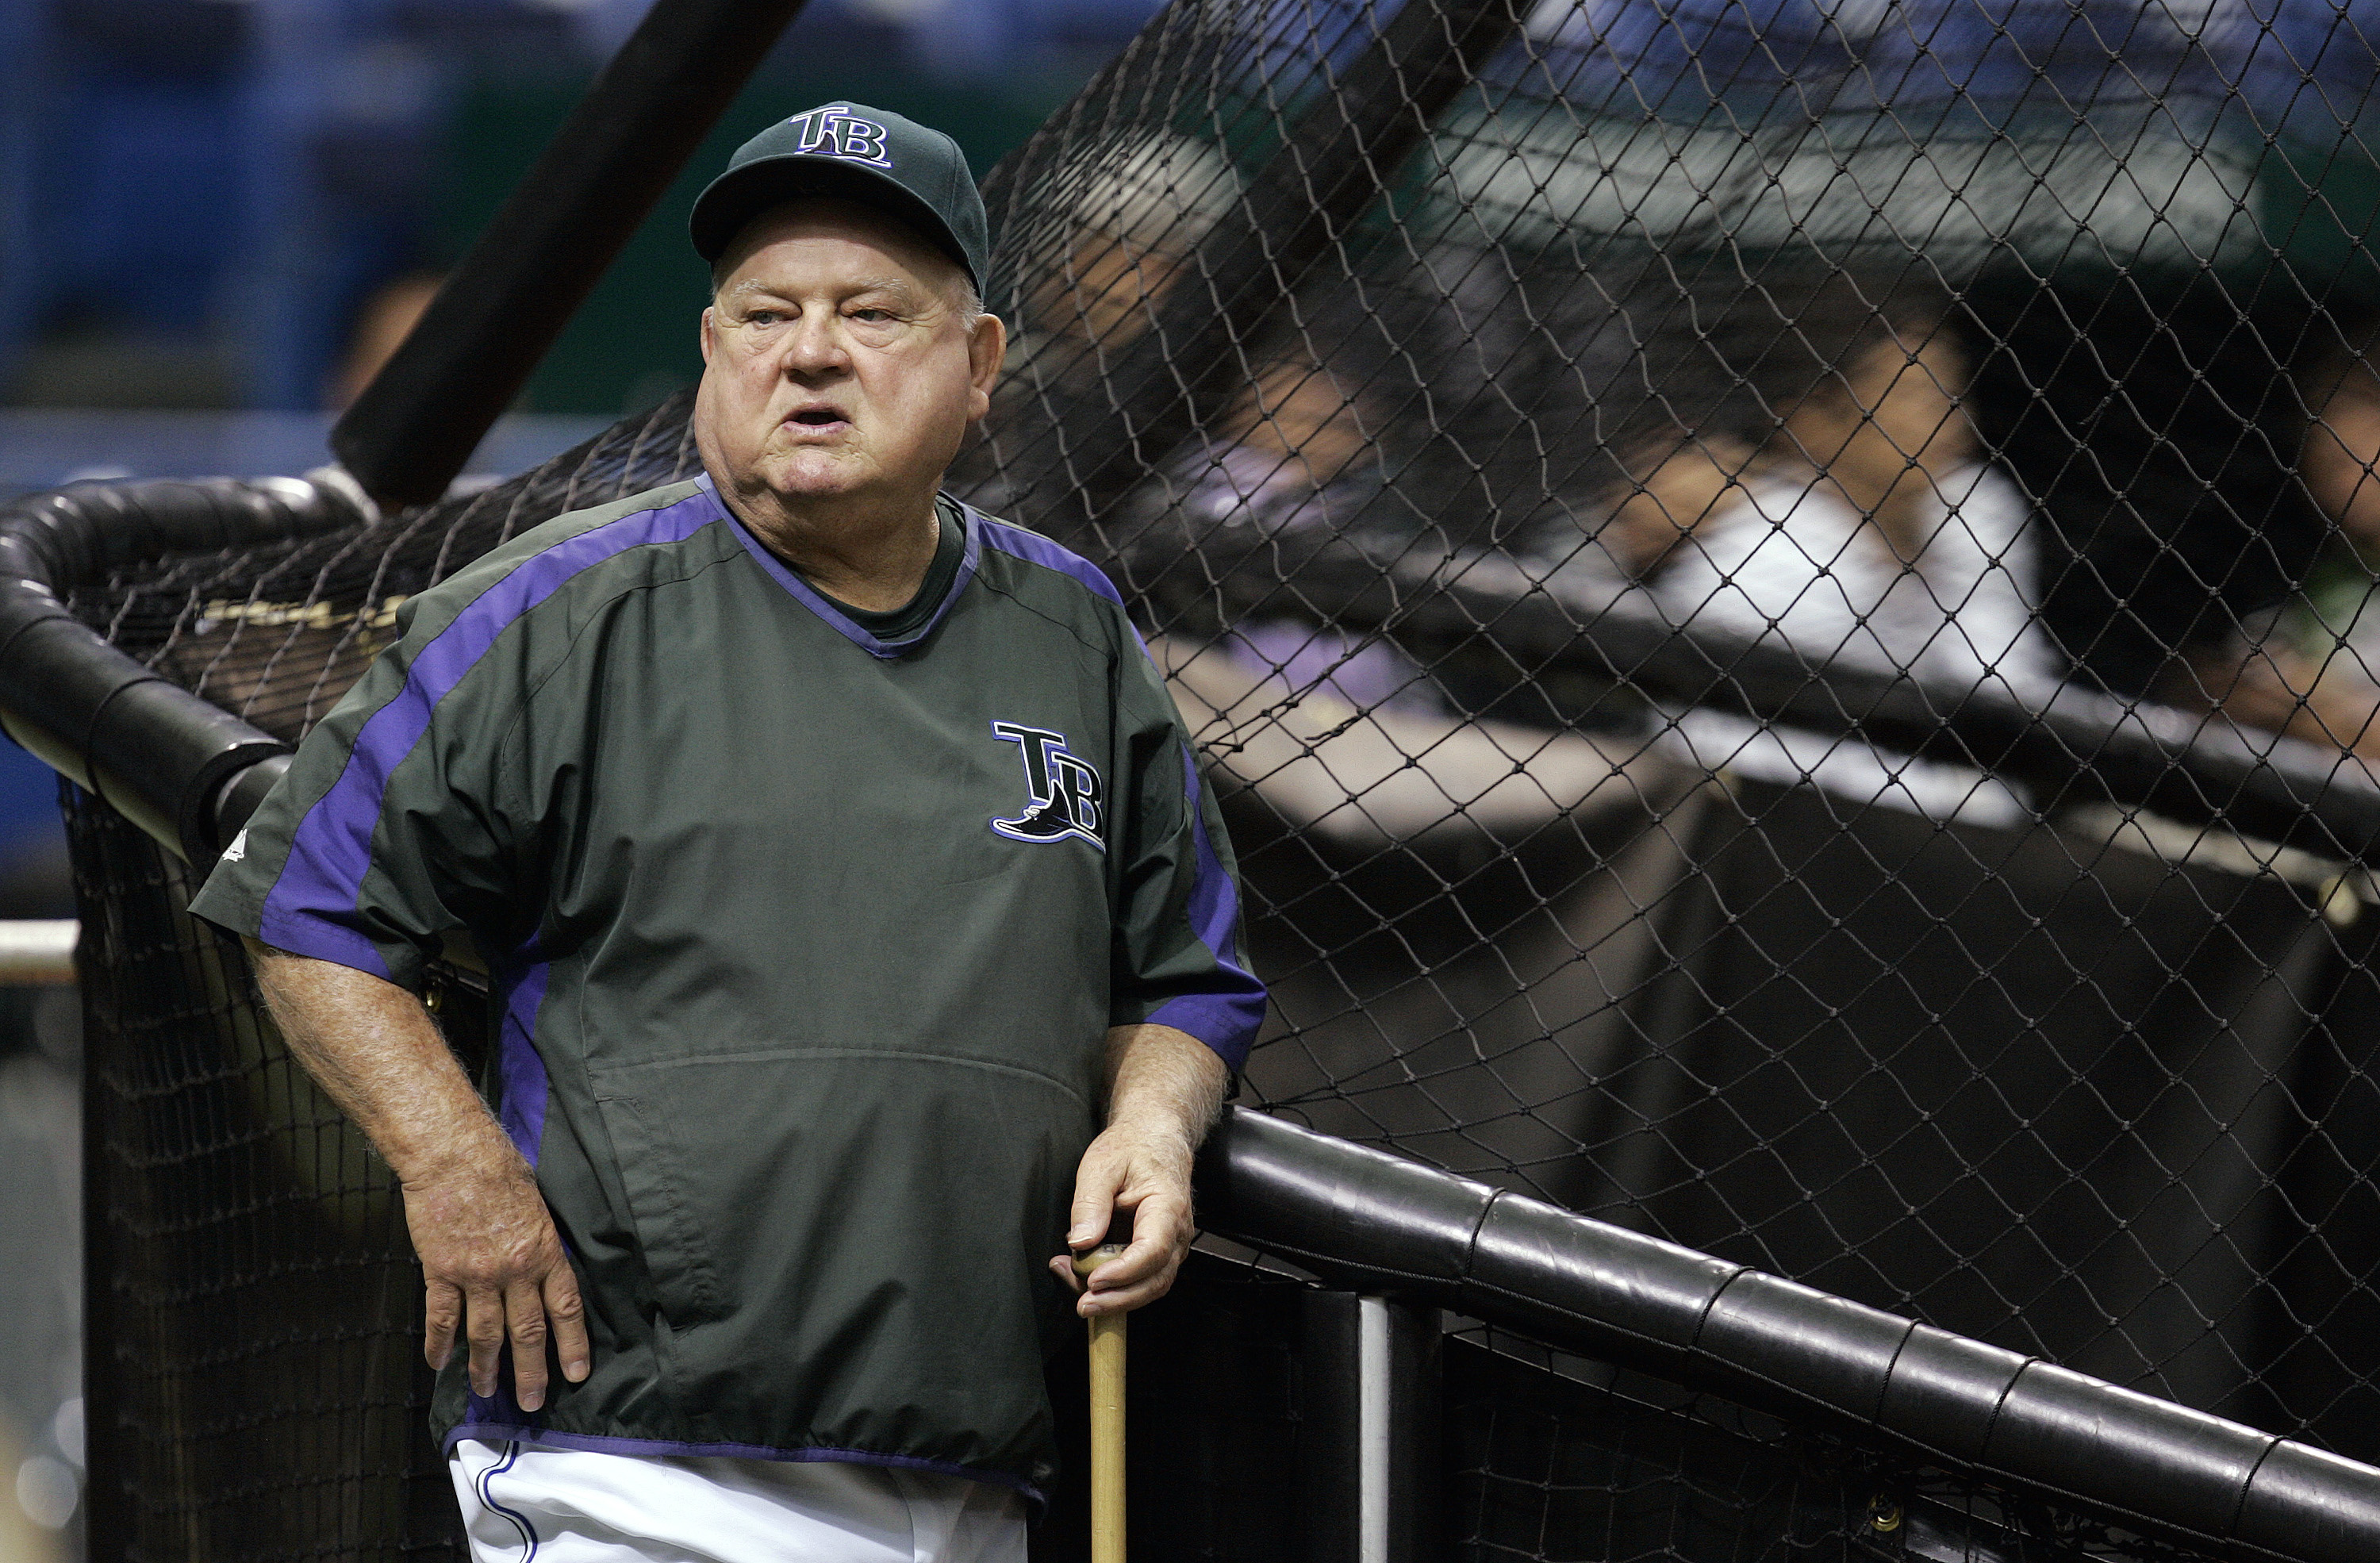 Rays adviser Don Zimmer, widely seen as a baseball treasure, dies